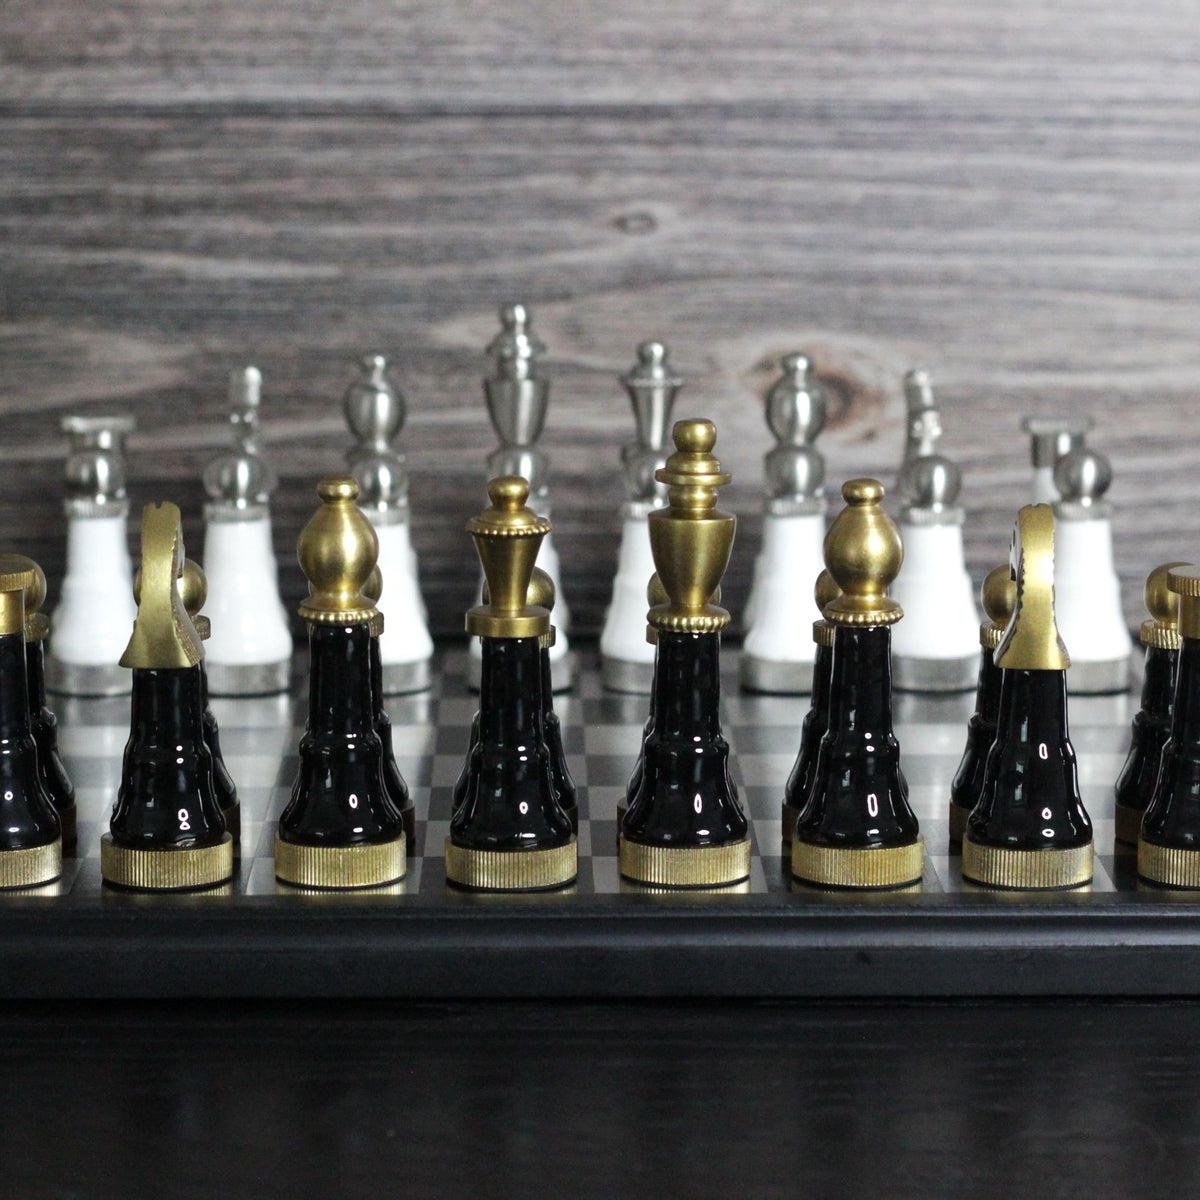 The Budapest Gambit - Black and White Metallic Chess Set - Marble Cultures